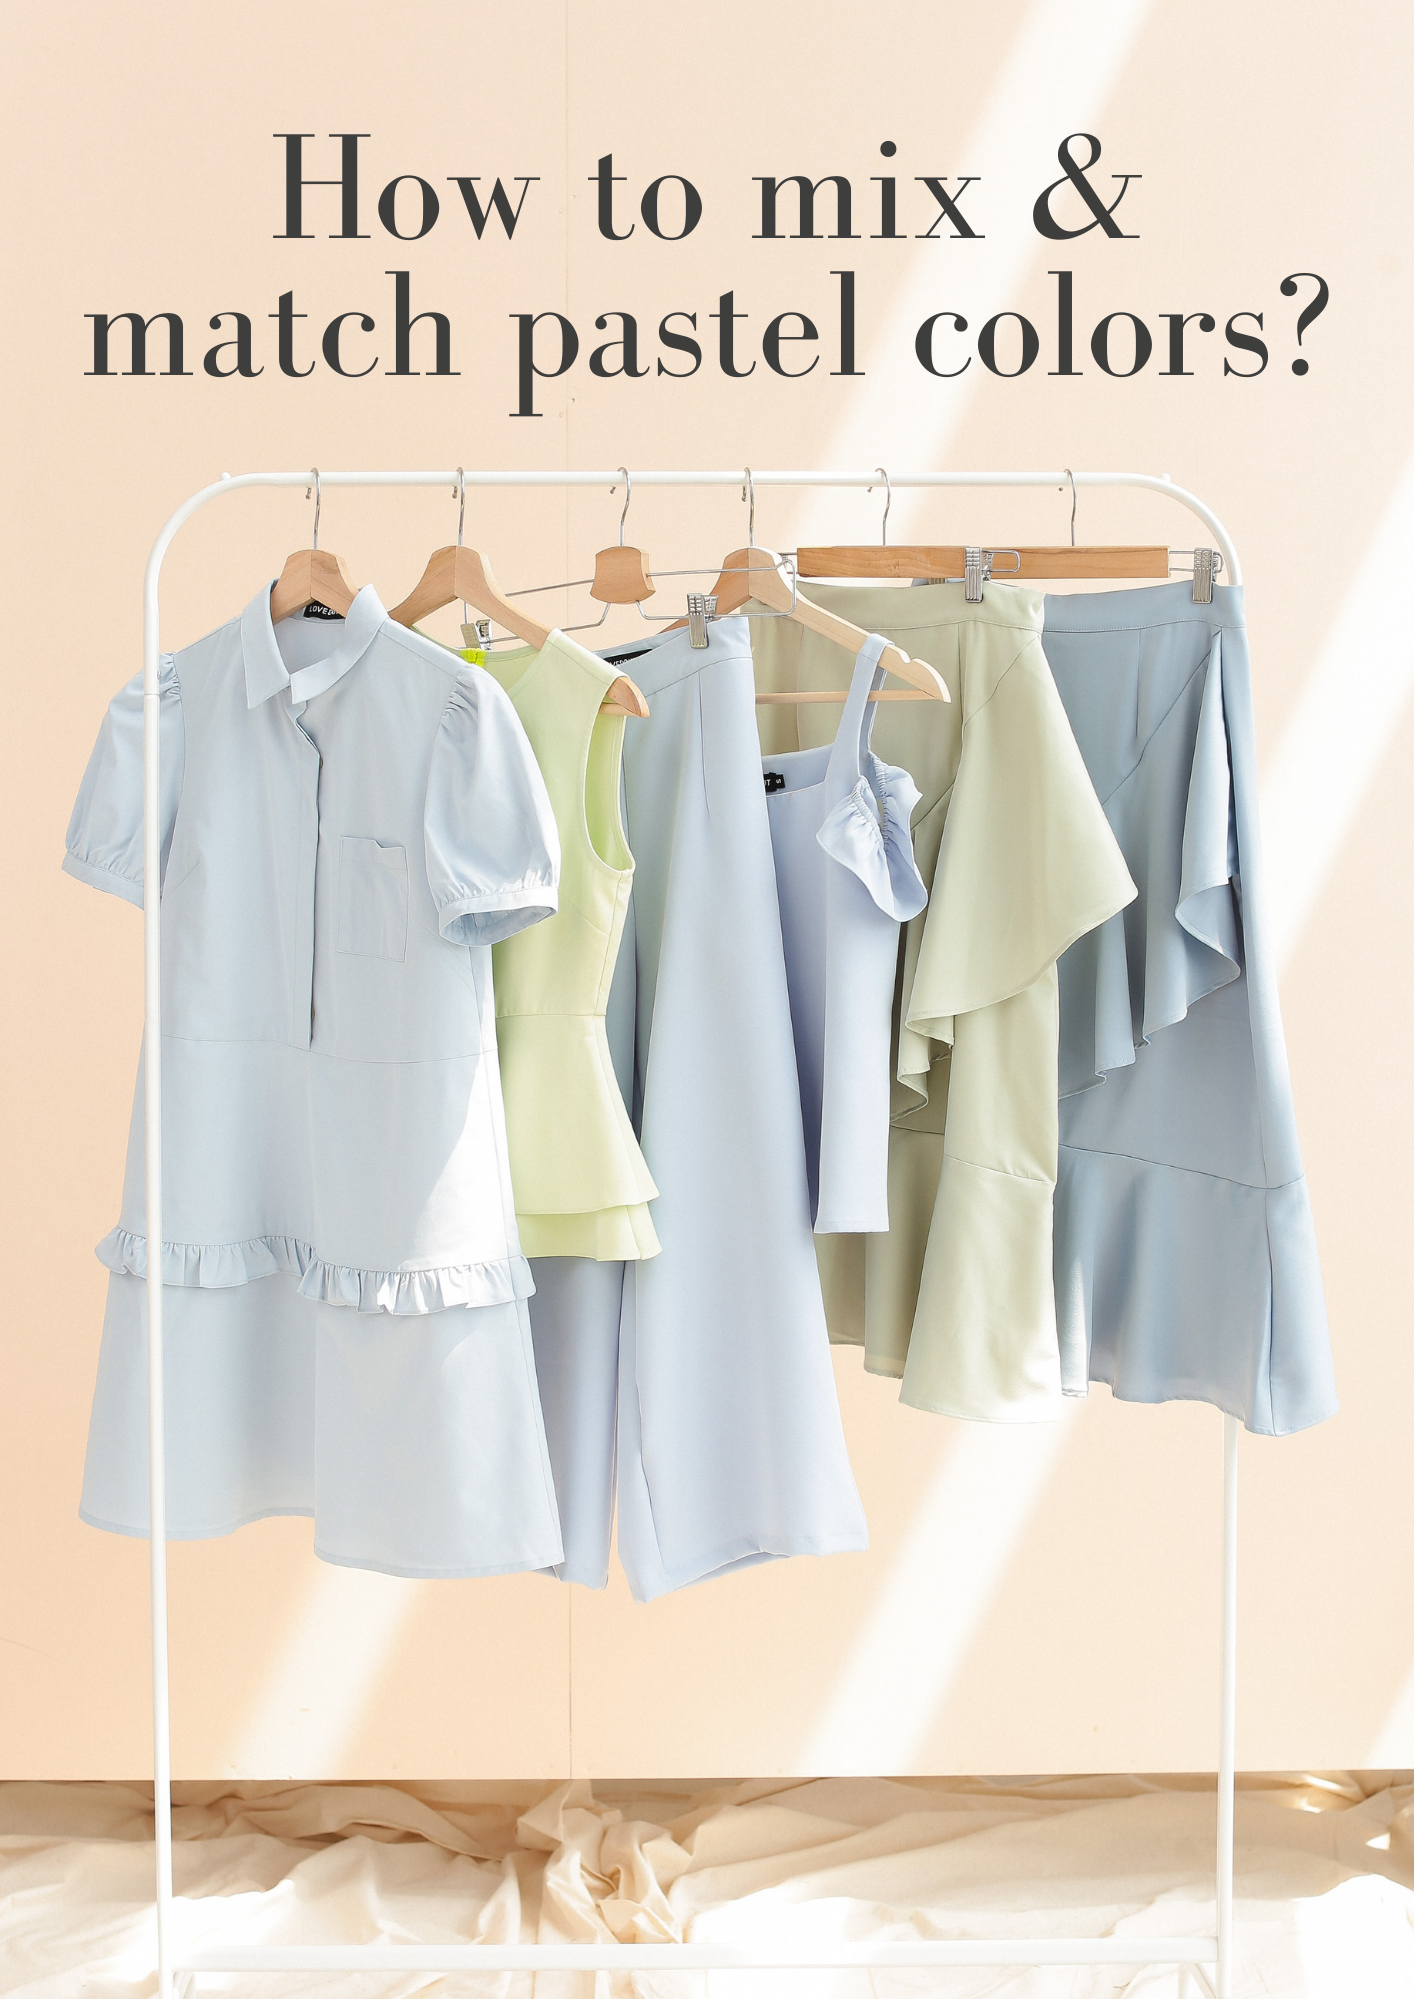 auktion Encyclopedia blad How to mix & match pastel colors? – Love Knot